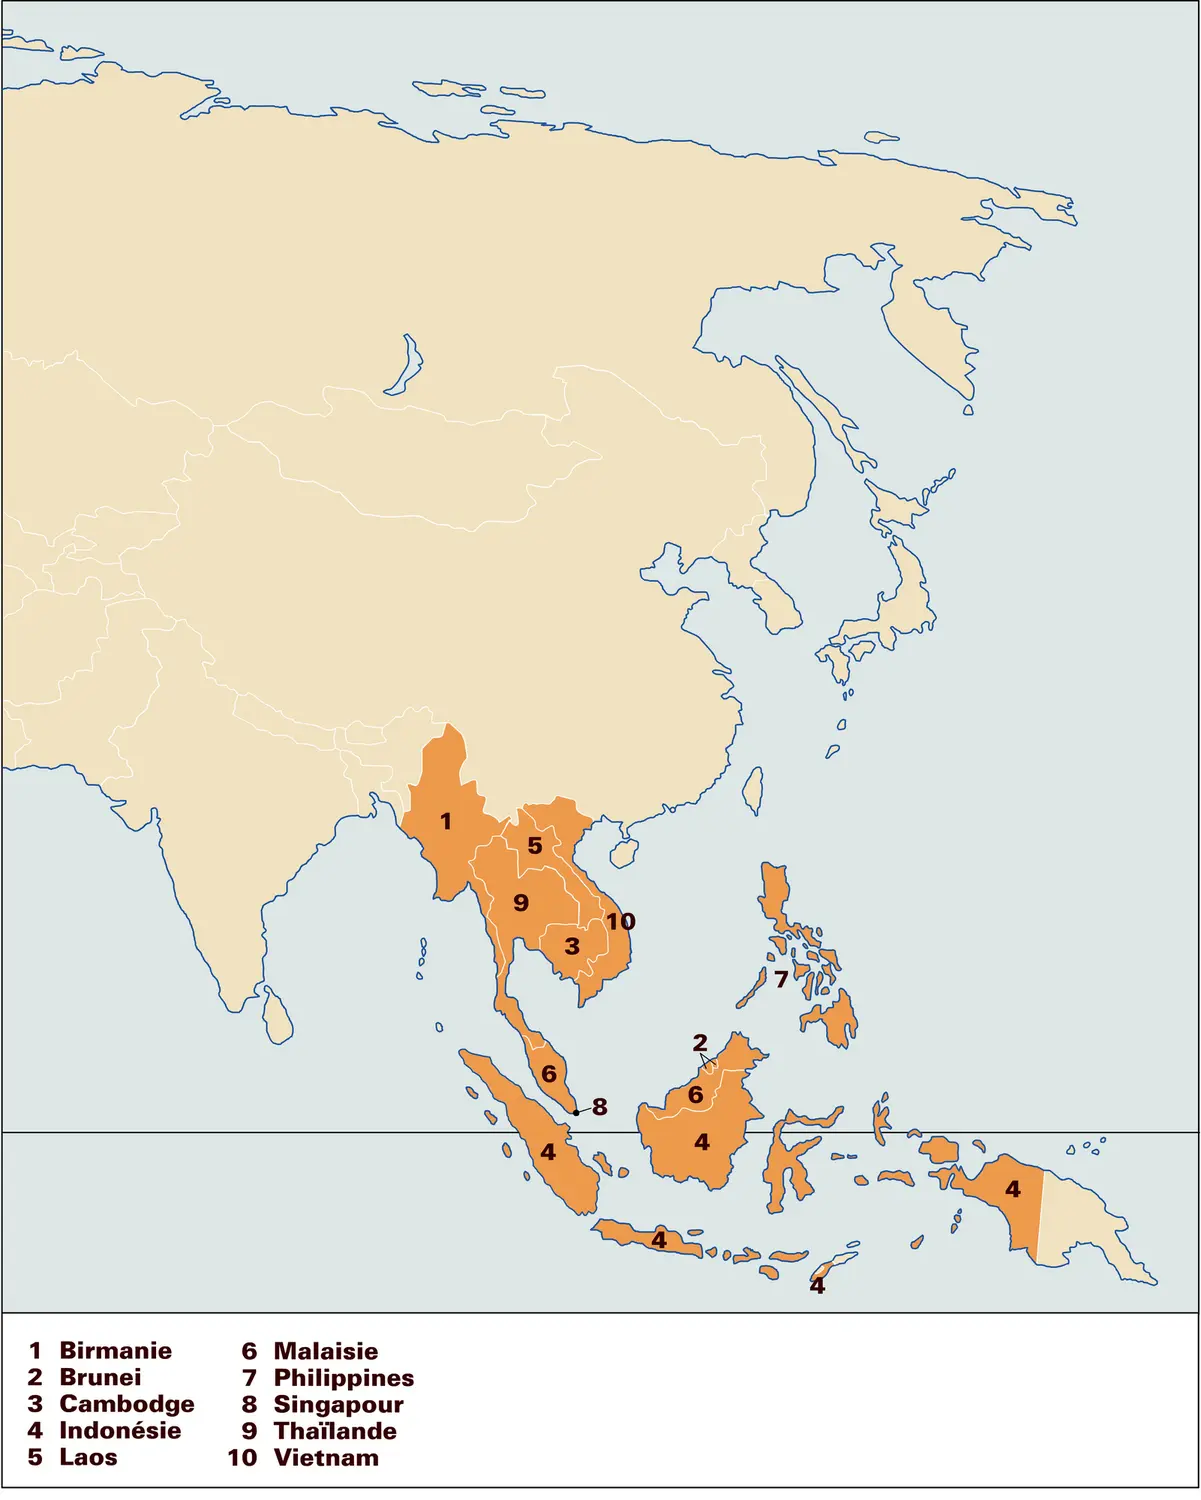 ASEAN (Association of South East Asian Nations)